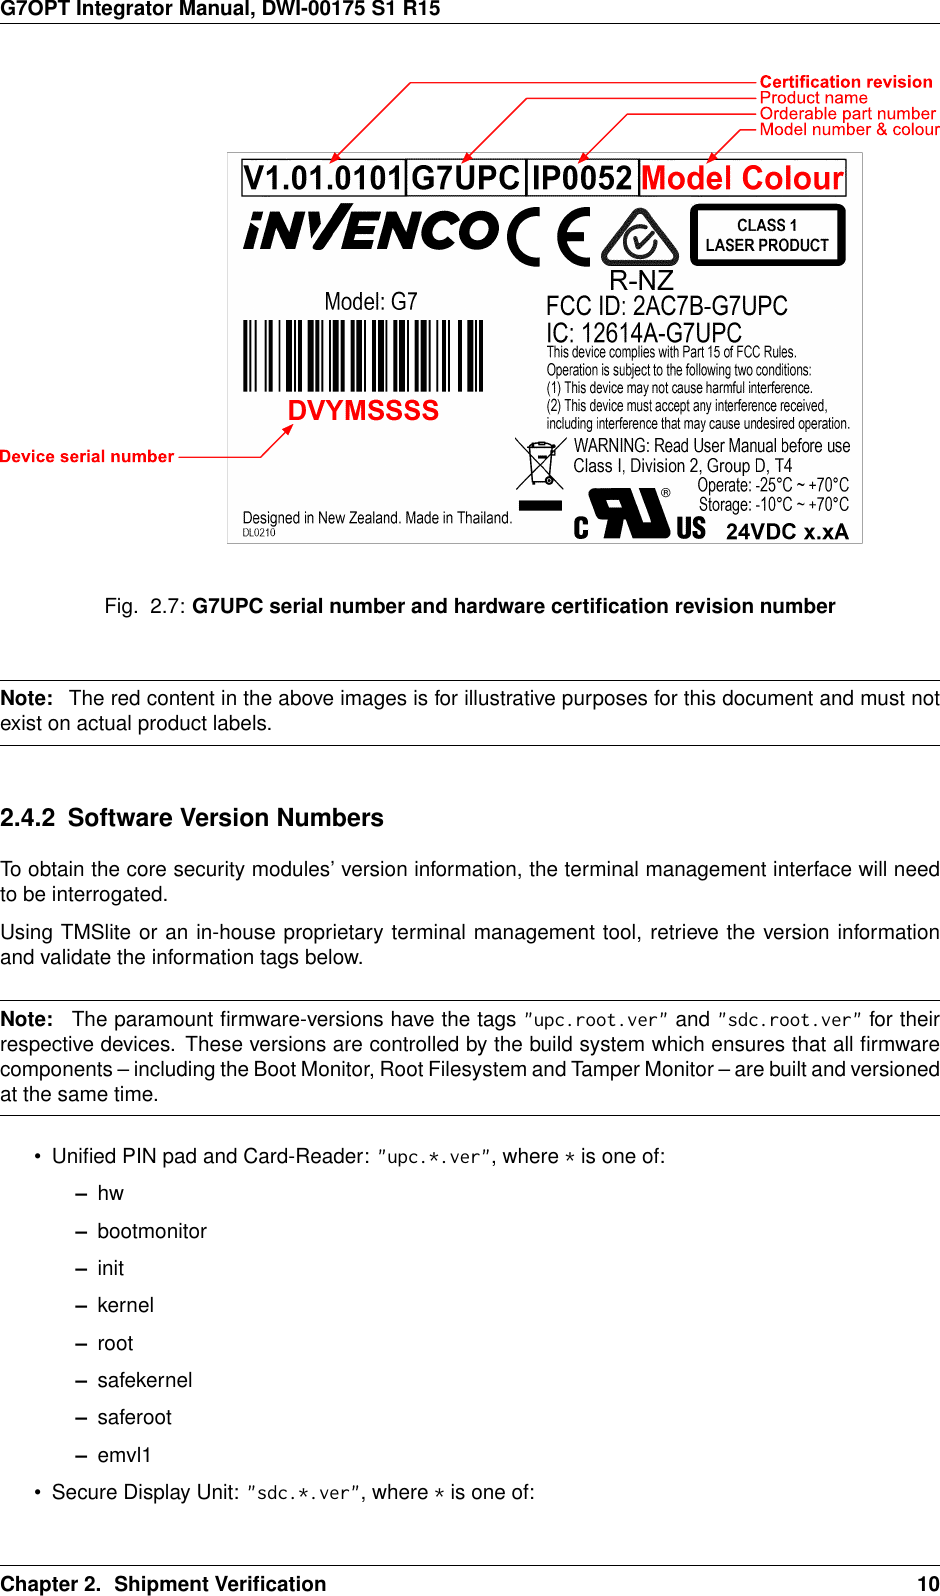 G7OPT Integrator Manual, DWI-00175 S1 R15Fig. 2.7: G7UPC serial number and hardware certiﬁcation revision numberNote: The red content in the above images is for illustrative purposes for this document and must notexist on actual product labels.2.4.2 Software Version NumbersTo obtain the core security modules’ version information, the terminal management interface will needto be interrogated.Using TMSlite or an in-house proprietary terminal management tool, retrieve the version informationand validate the information tags below.Note: The paramount ﬁrmware-versions have the tags &quot;upc.root.ver&quot; and &quot;sdc.root.ver&quot; for theirrespective devices. These versions are controlled by the build system which ensures that all ﬁrmwarecomponents – including the Boot Monitor, Root Filesystem and Tamper Monitor – are built and versionedat the same time.• Uniﬁed PIN pad and Card-Reader: &quot;upc.*.ver&quot;, where *is one of:–hw–bootmonitor–init–kernel–root–safekernel–saferoot–emvl1• Secure Display Unit: &quot;sdc.*.ver&quot;, where *is one of:Chapter 2. Shipment Veriﬁcation 10